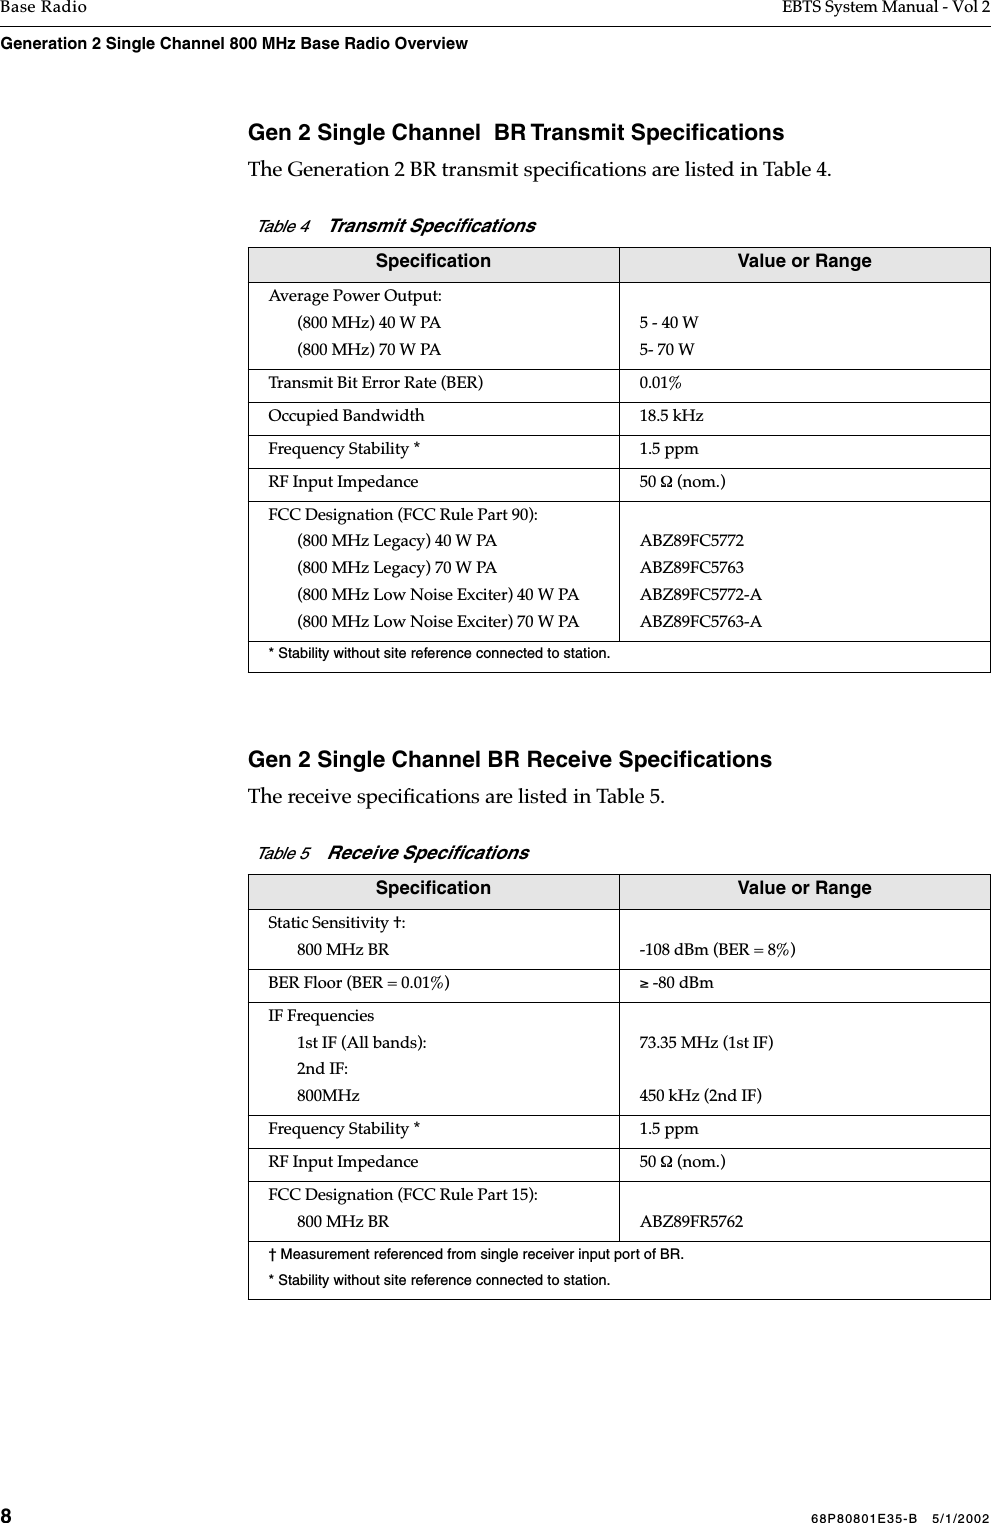 868P80801E35-B   5/1/2002Base Radio EBTS System Manual - Vol 2Generation 2 Single Channel 800 MHz Base Radio Overview Gen 2 Single Channel  BR Transmit SpeciﬁcationsThe Generation 2 BR transmit speciﬁcations are listed in Table 4.Gen 2 Single Channel BR Receive SpeciﬁcationsThe receive speciﬁcations are listed in Table 5.     Table 4    Transmit Speciﬁcations  Speciﬁcation Value or RangeAverage Power Output:(800 MHz) 40 W PA (800 MHz) 70 W PA5 - 40 W5- 70 WTransmit Bit Error Rate (BER) 0.01%Occupied Bandwidth 18.5 kHzFrequency Stability * 1.5 ppmRF Input Impedance 50 Ω (nom.)FCC Designation (FCC Rule Part 90):(800 MHz Legacy) 40 W PA(800 MHz Legacy) 70 W PA(800 MHz Low Noise Exciter) 40 W PA(800 MHz Low Noise Exciter) 70 W PAABZ89FC5772ABZ89FC5763ABZ89FC5772-AABZ89FC5763-A* Stability without site reference connected to station.Table 5    Receive Speciﬁcations Speciﬁcation Value or RangeStatic Sensitivity †:800 MHz BR  -108 dBm (BER = 8%)BER Floor (BER = 0.01%) ≥ -80 dBmIF Frequencies1st IF (All bands):2nd IF:800MHz 73.35 MHz (1st IF)450 kHz (2nd IF)Frequency Stability * 1.5 ppmRF Input Impedance 50 Ω (nom.)FCC Designation (FCC Rule Part 15):800 MHz BR  ABZ89FR5762† Measurement referenced from single receiver input port of BR.* Stability without site reference connected to station.